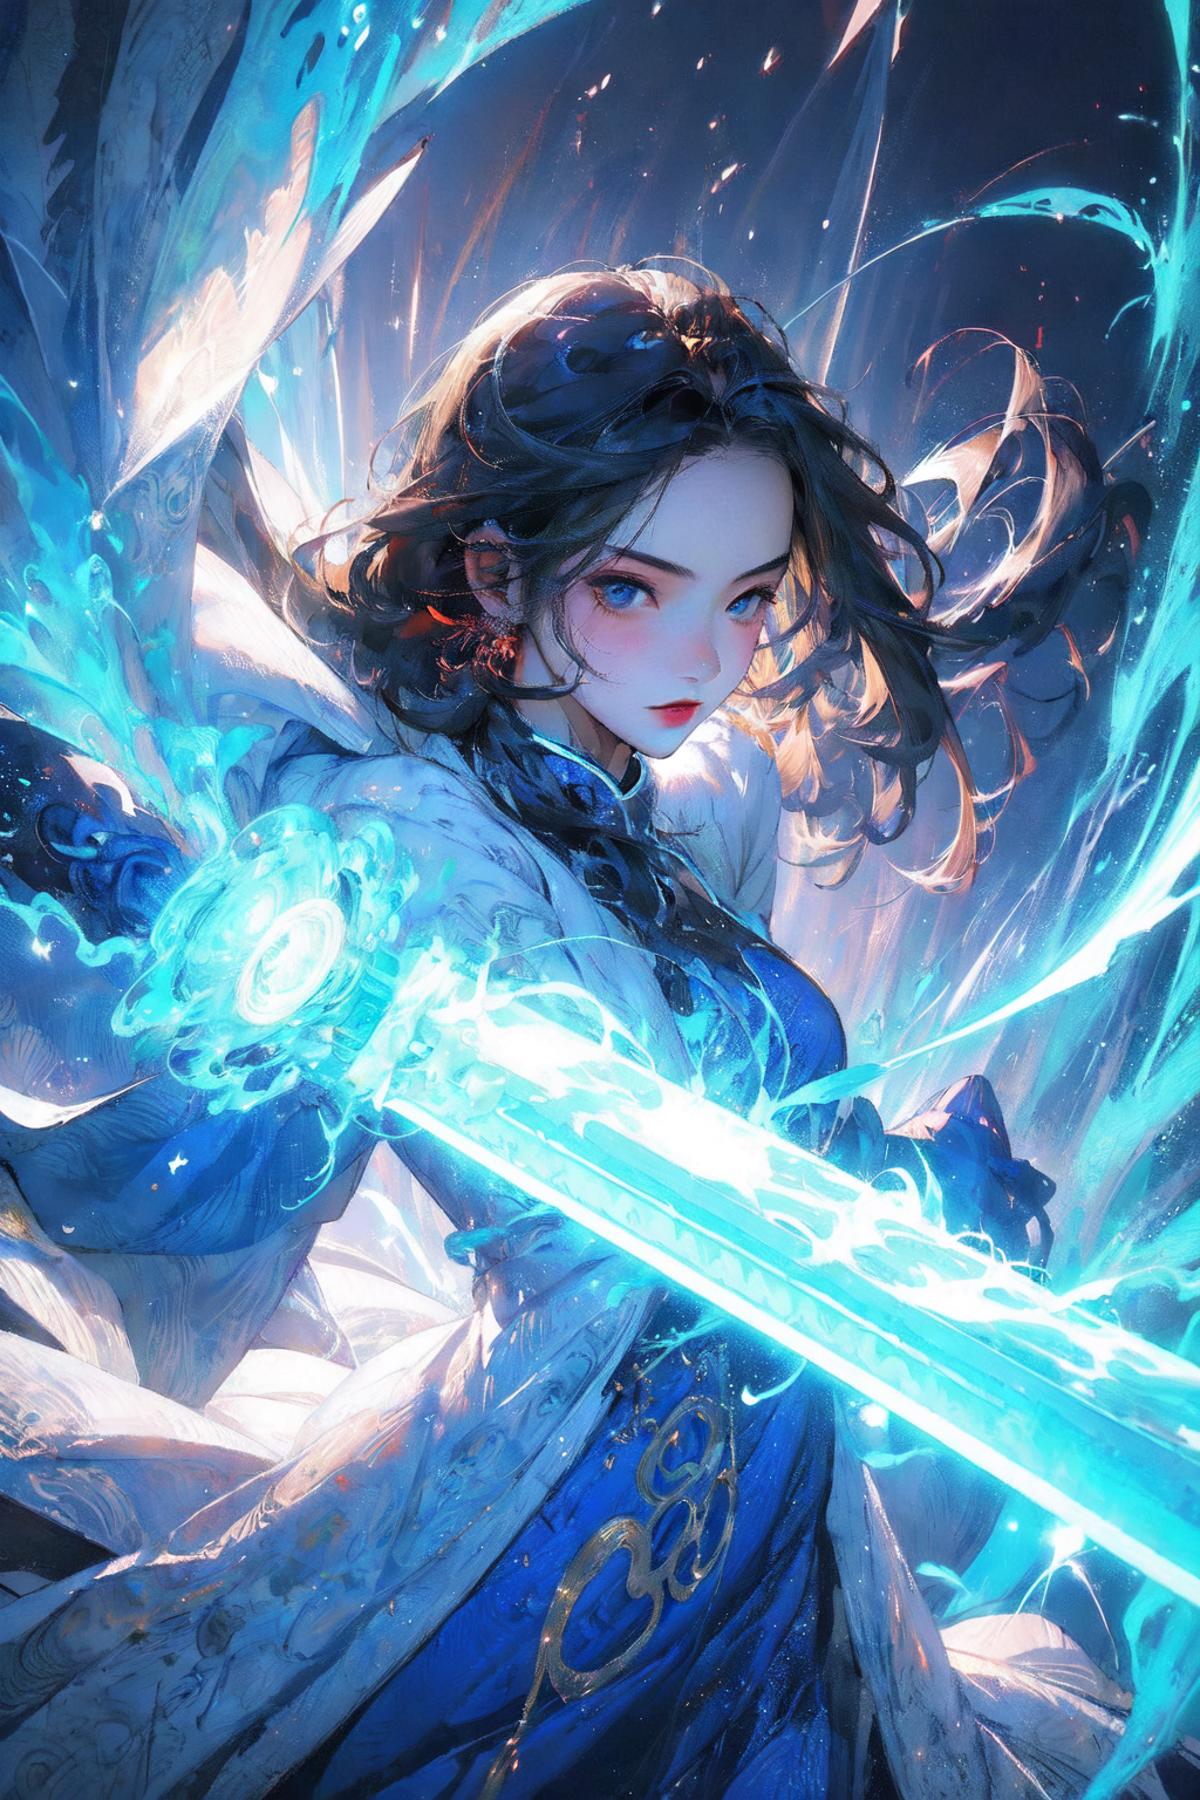 A beautiful illustration of a woman with blue hair holding a blue sword in a blue dress.